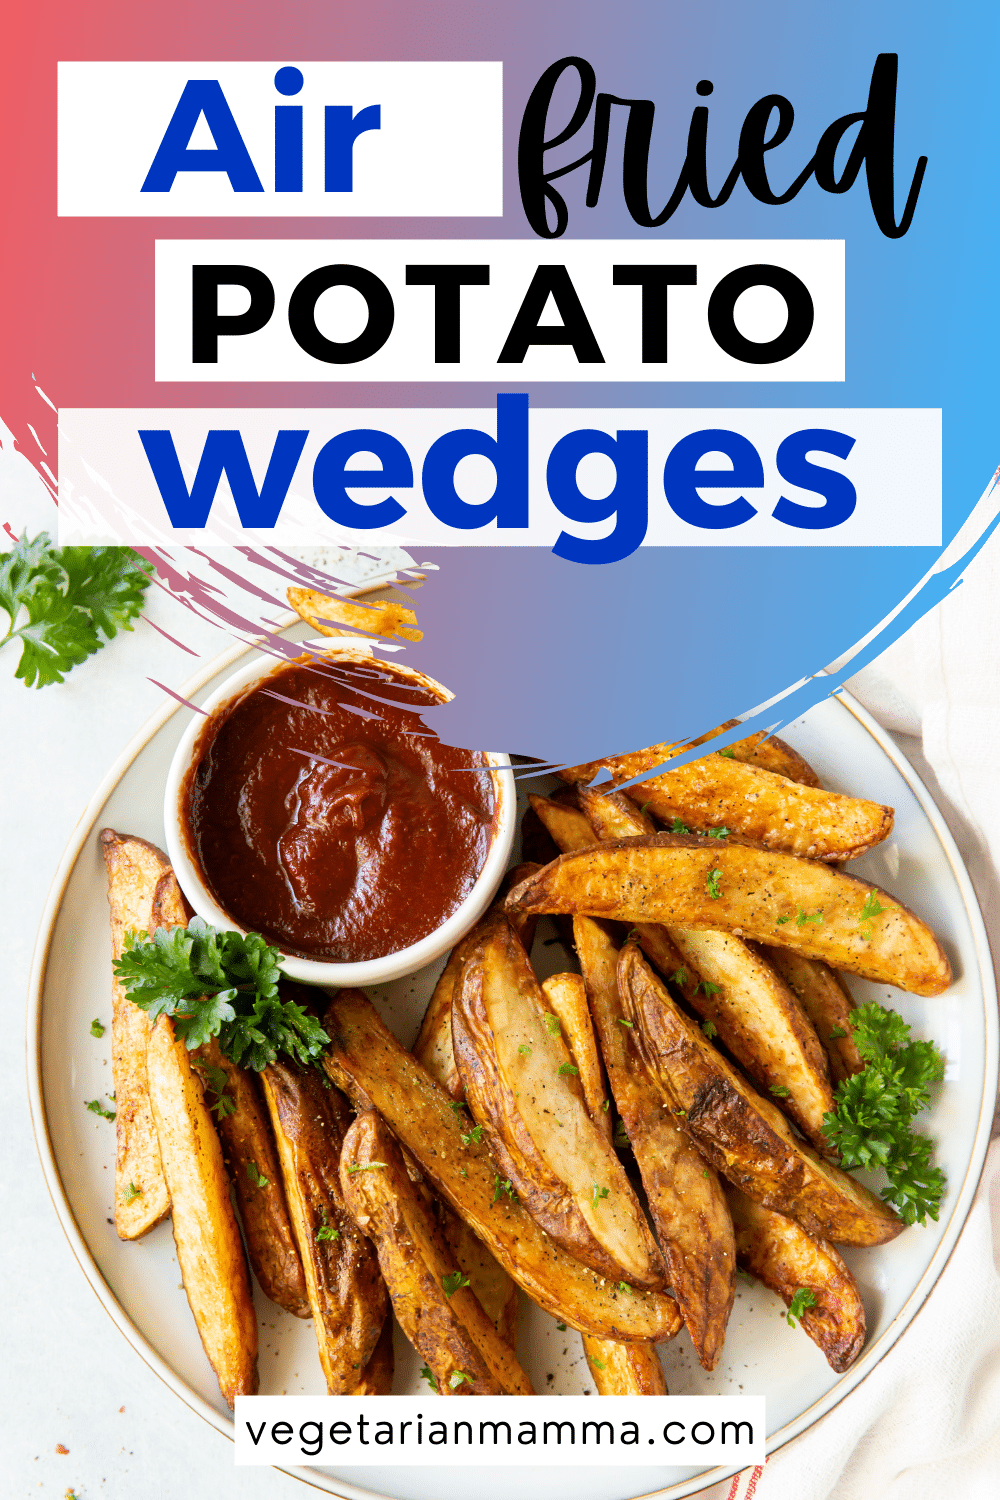 Air Fried Potato Wedges are the perfect combination of a crispy outside and a soft tender potato inside! You are going to love these air fried potato wedges!